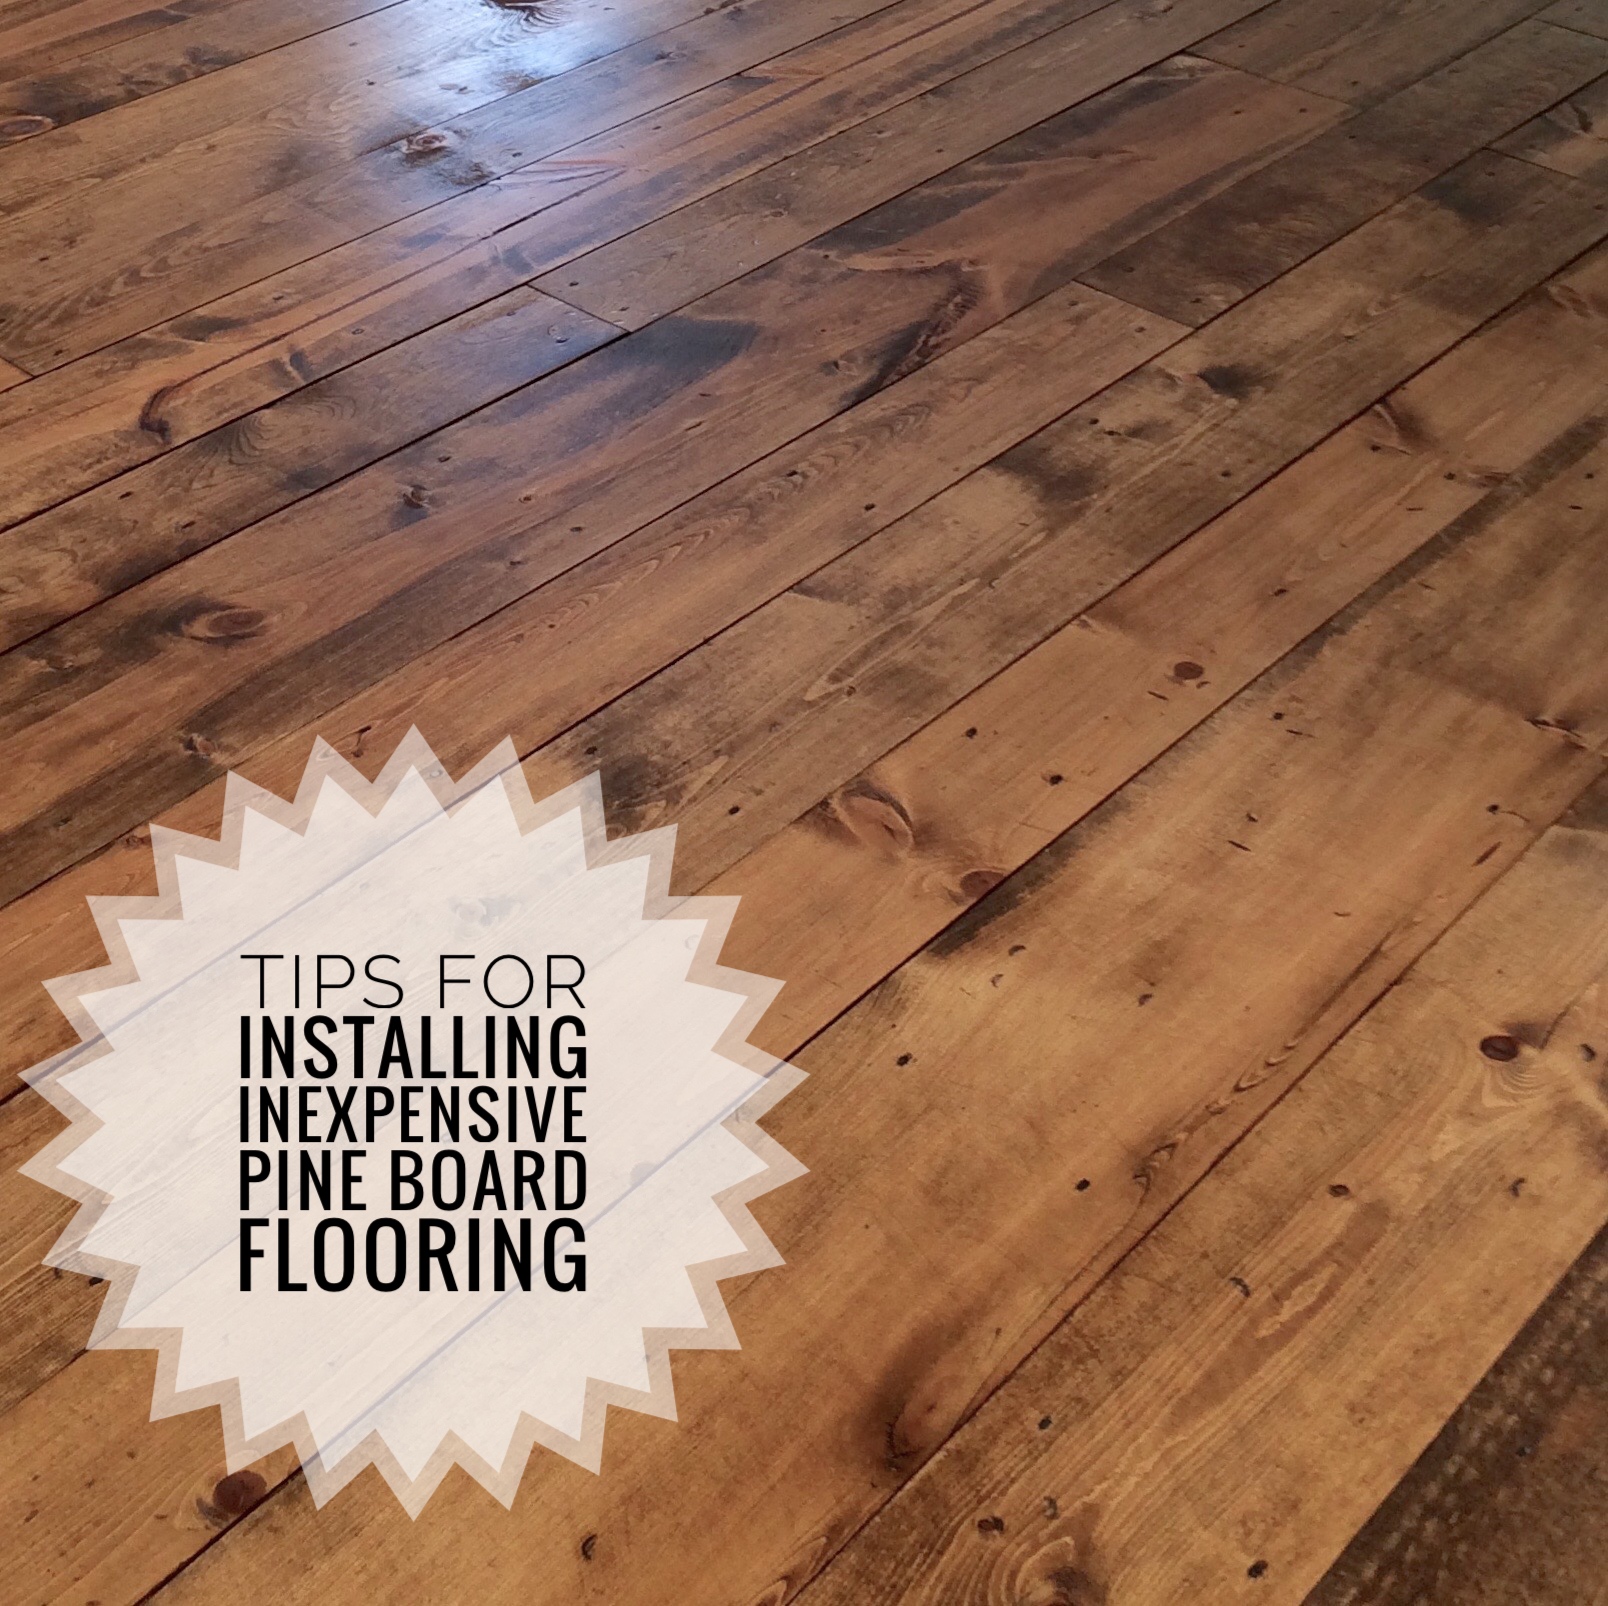 Inexpensive Wood Flooring Using Pine Boards All You Need